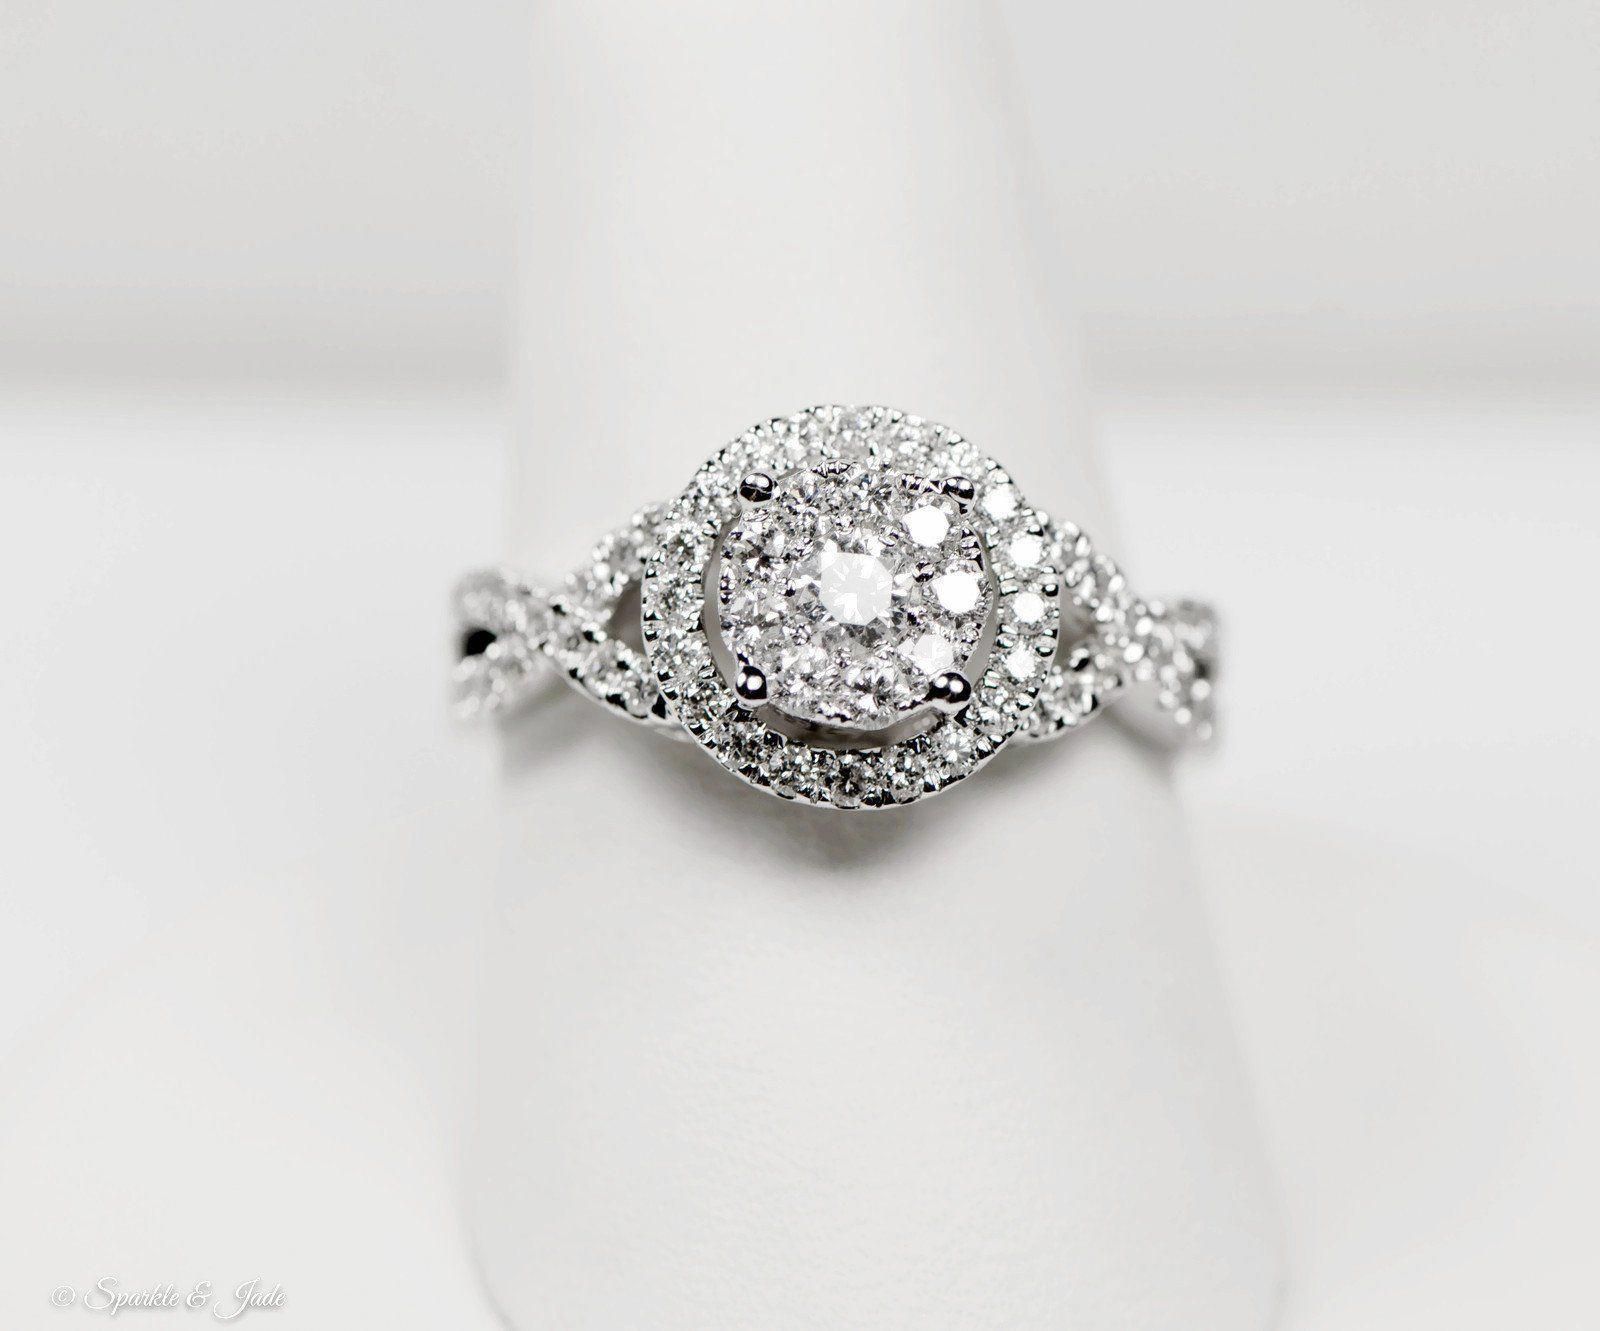 Vintage Engagement Rings 8000 Vintageengagementrings With Images